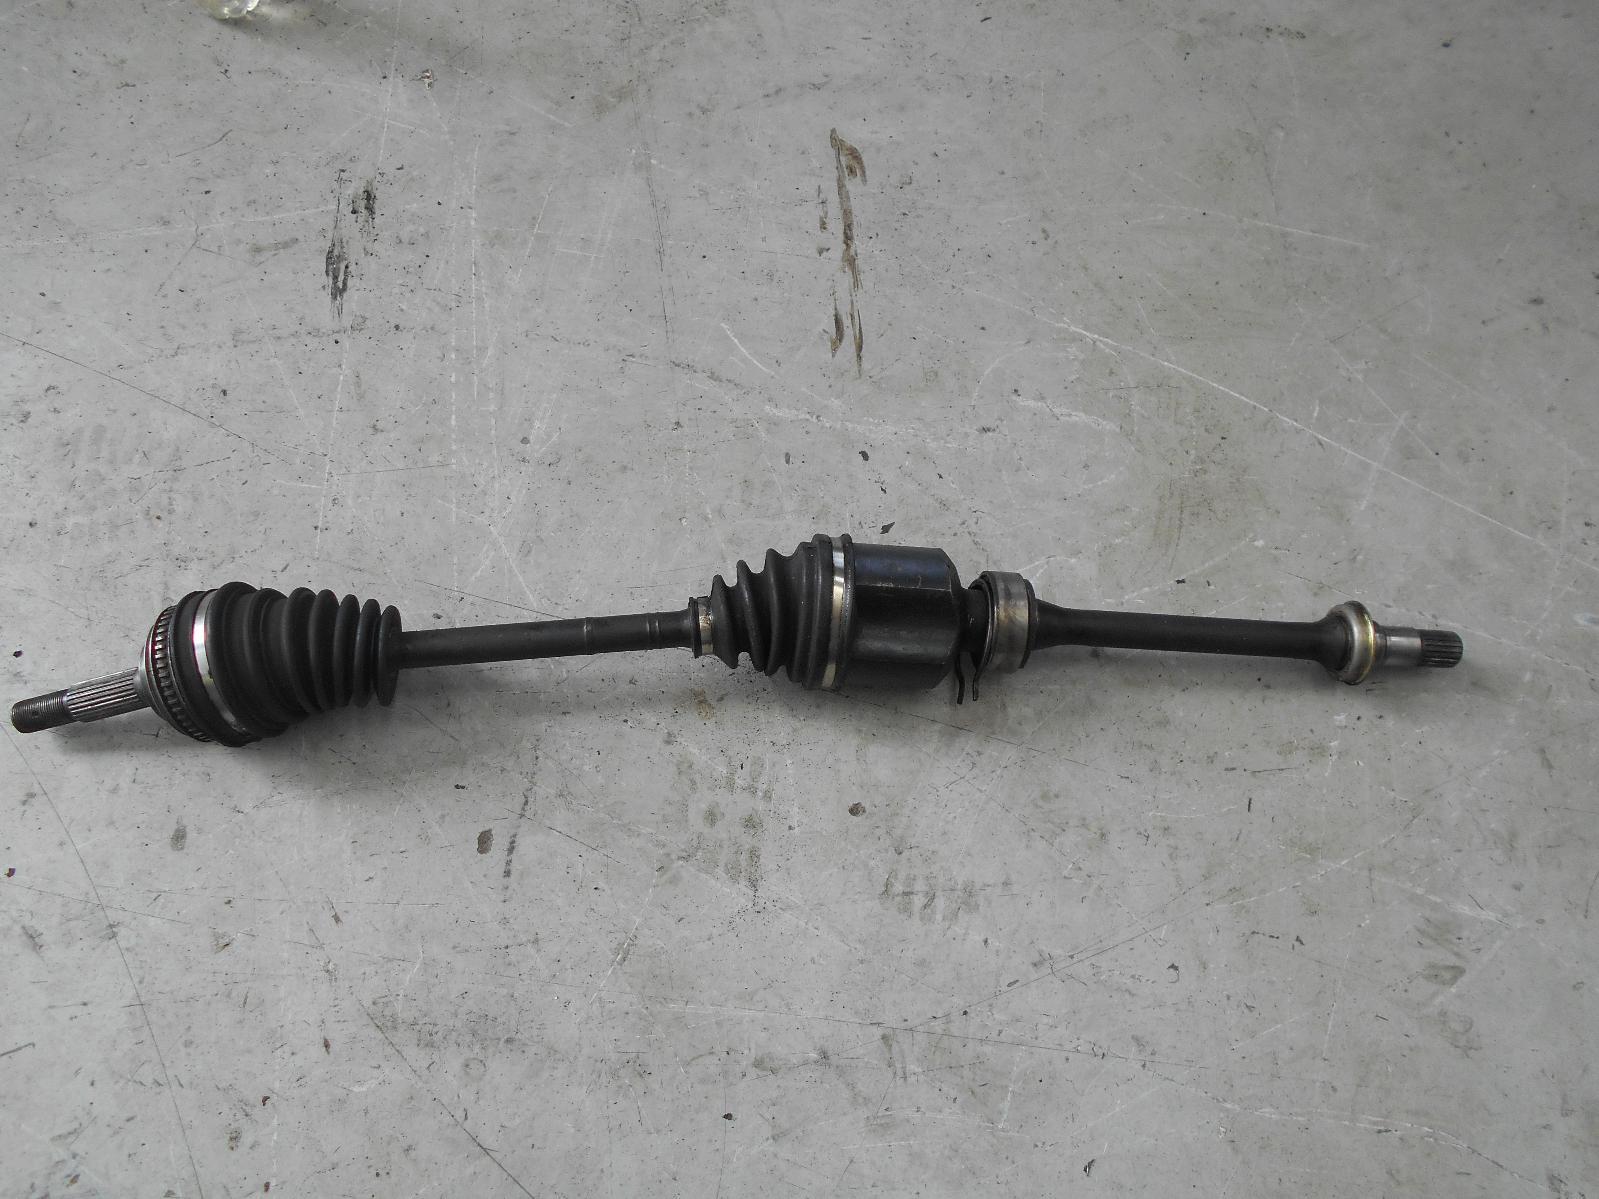 TOYOTA CAMRY, Right Driveshaft, SK20, 2.2, 5S-FE, 4CYL, ABS TYPE, 08/97-08/02